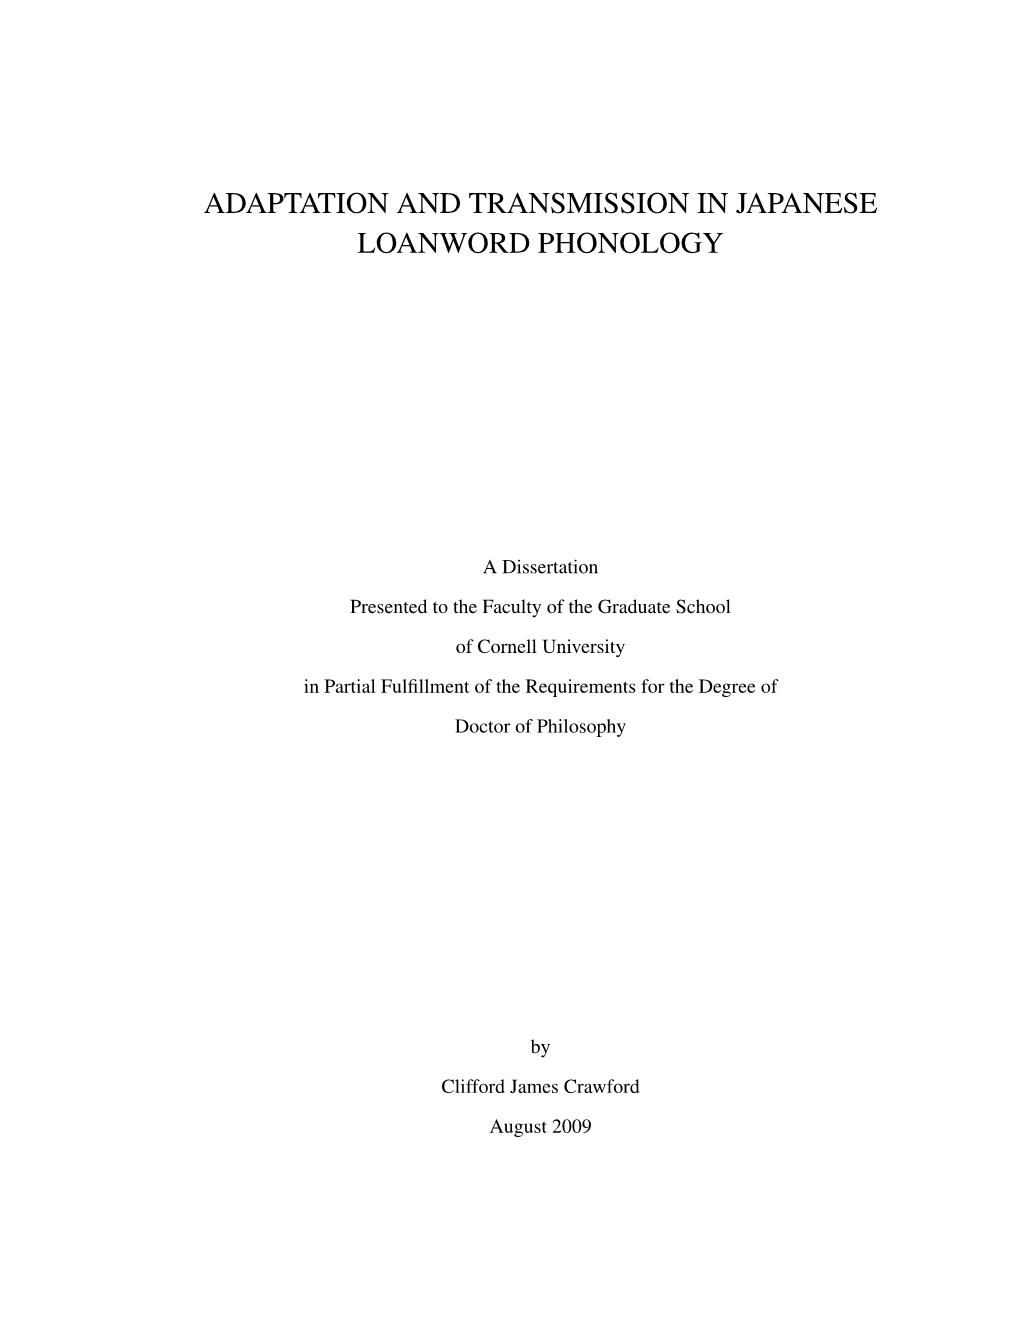 Adaptation and Transmission in Japanese Loanword Phonology